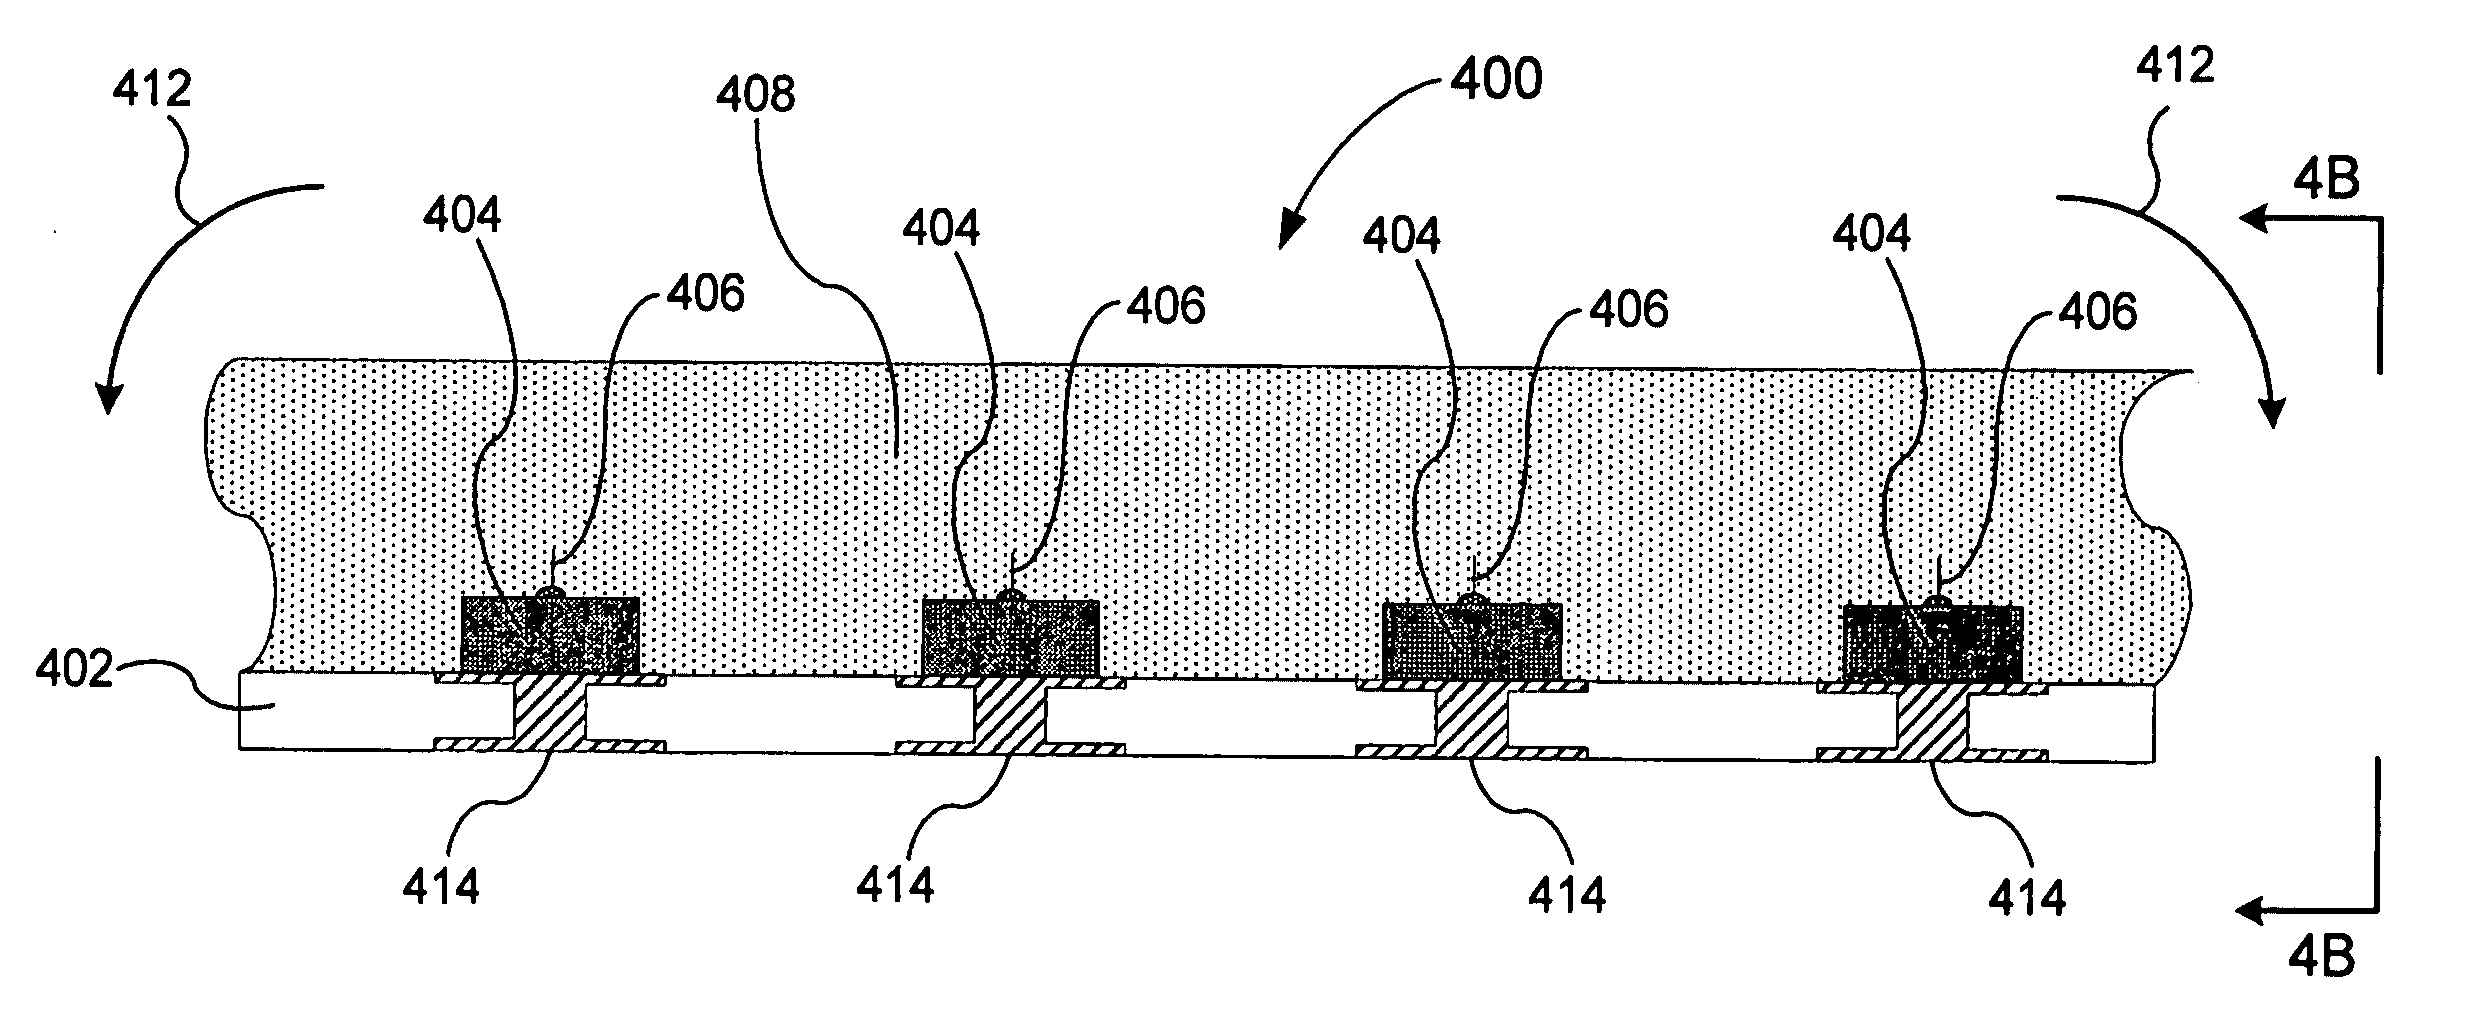 Flexible circuits having improved reliability and thermal dissipation